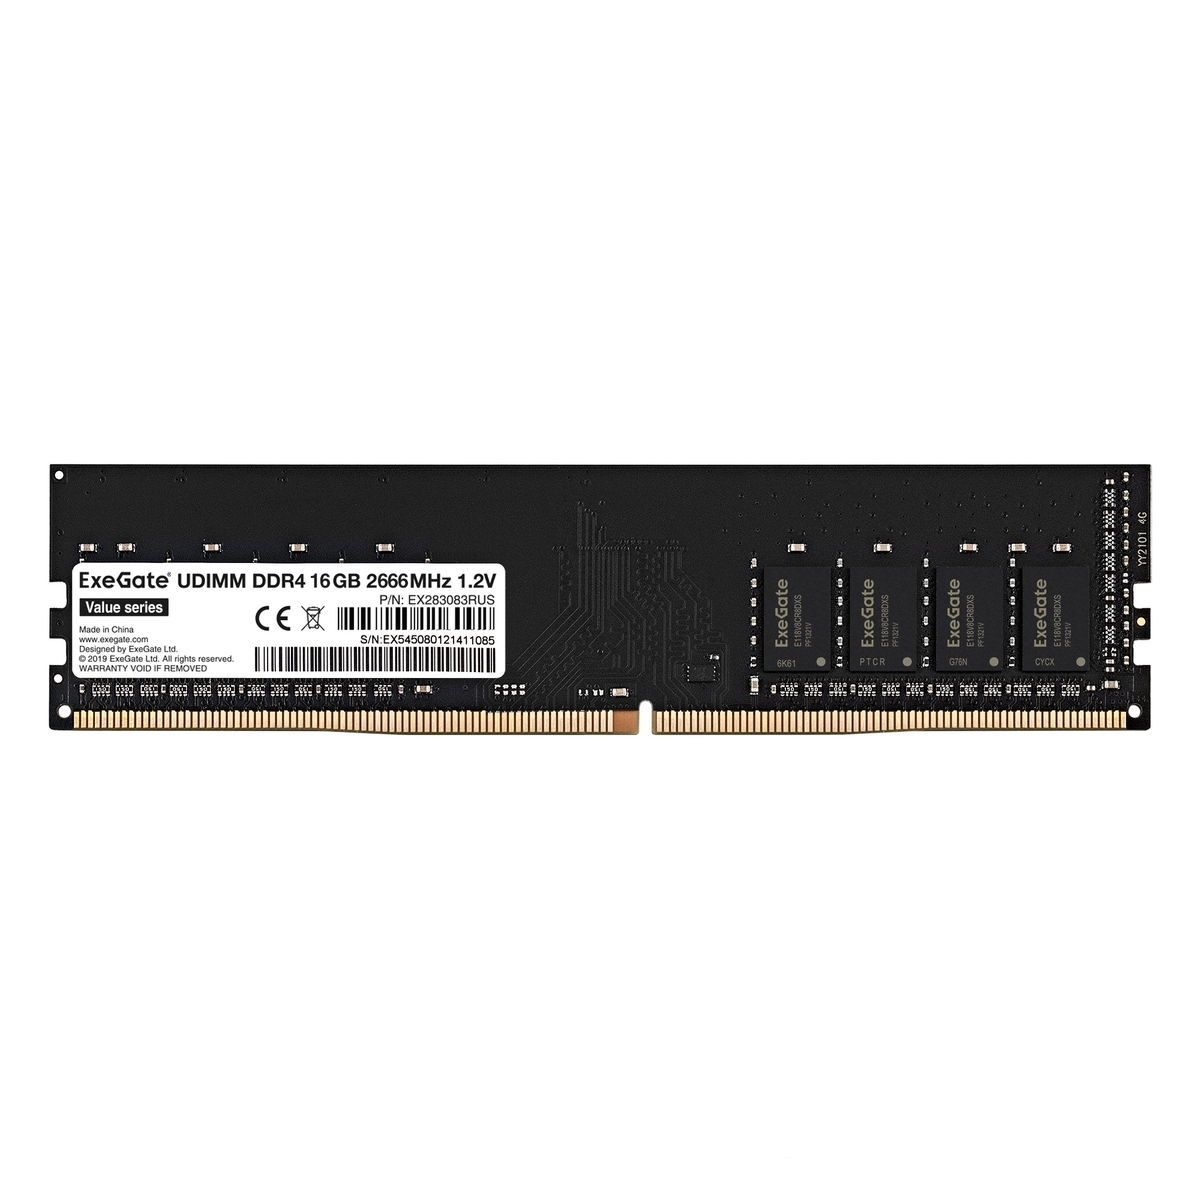 Value DIMM DDR4 16GB <PC4-21300> 2666MHz